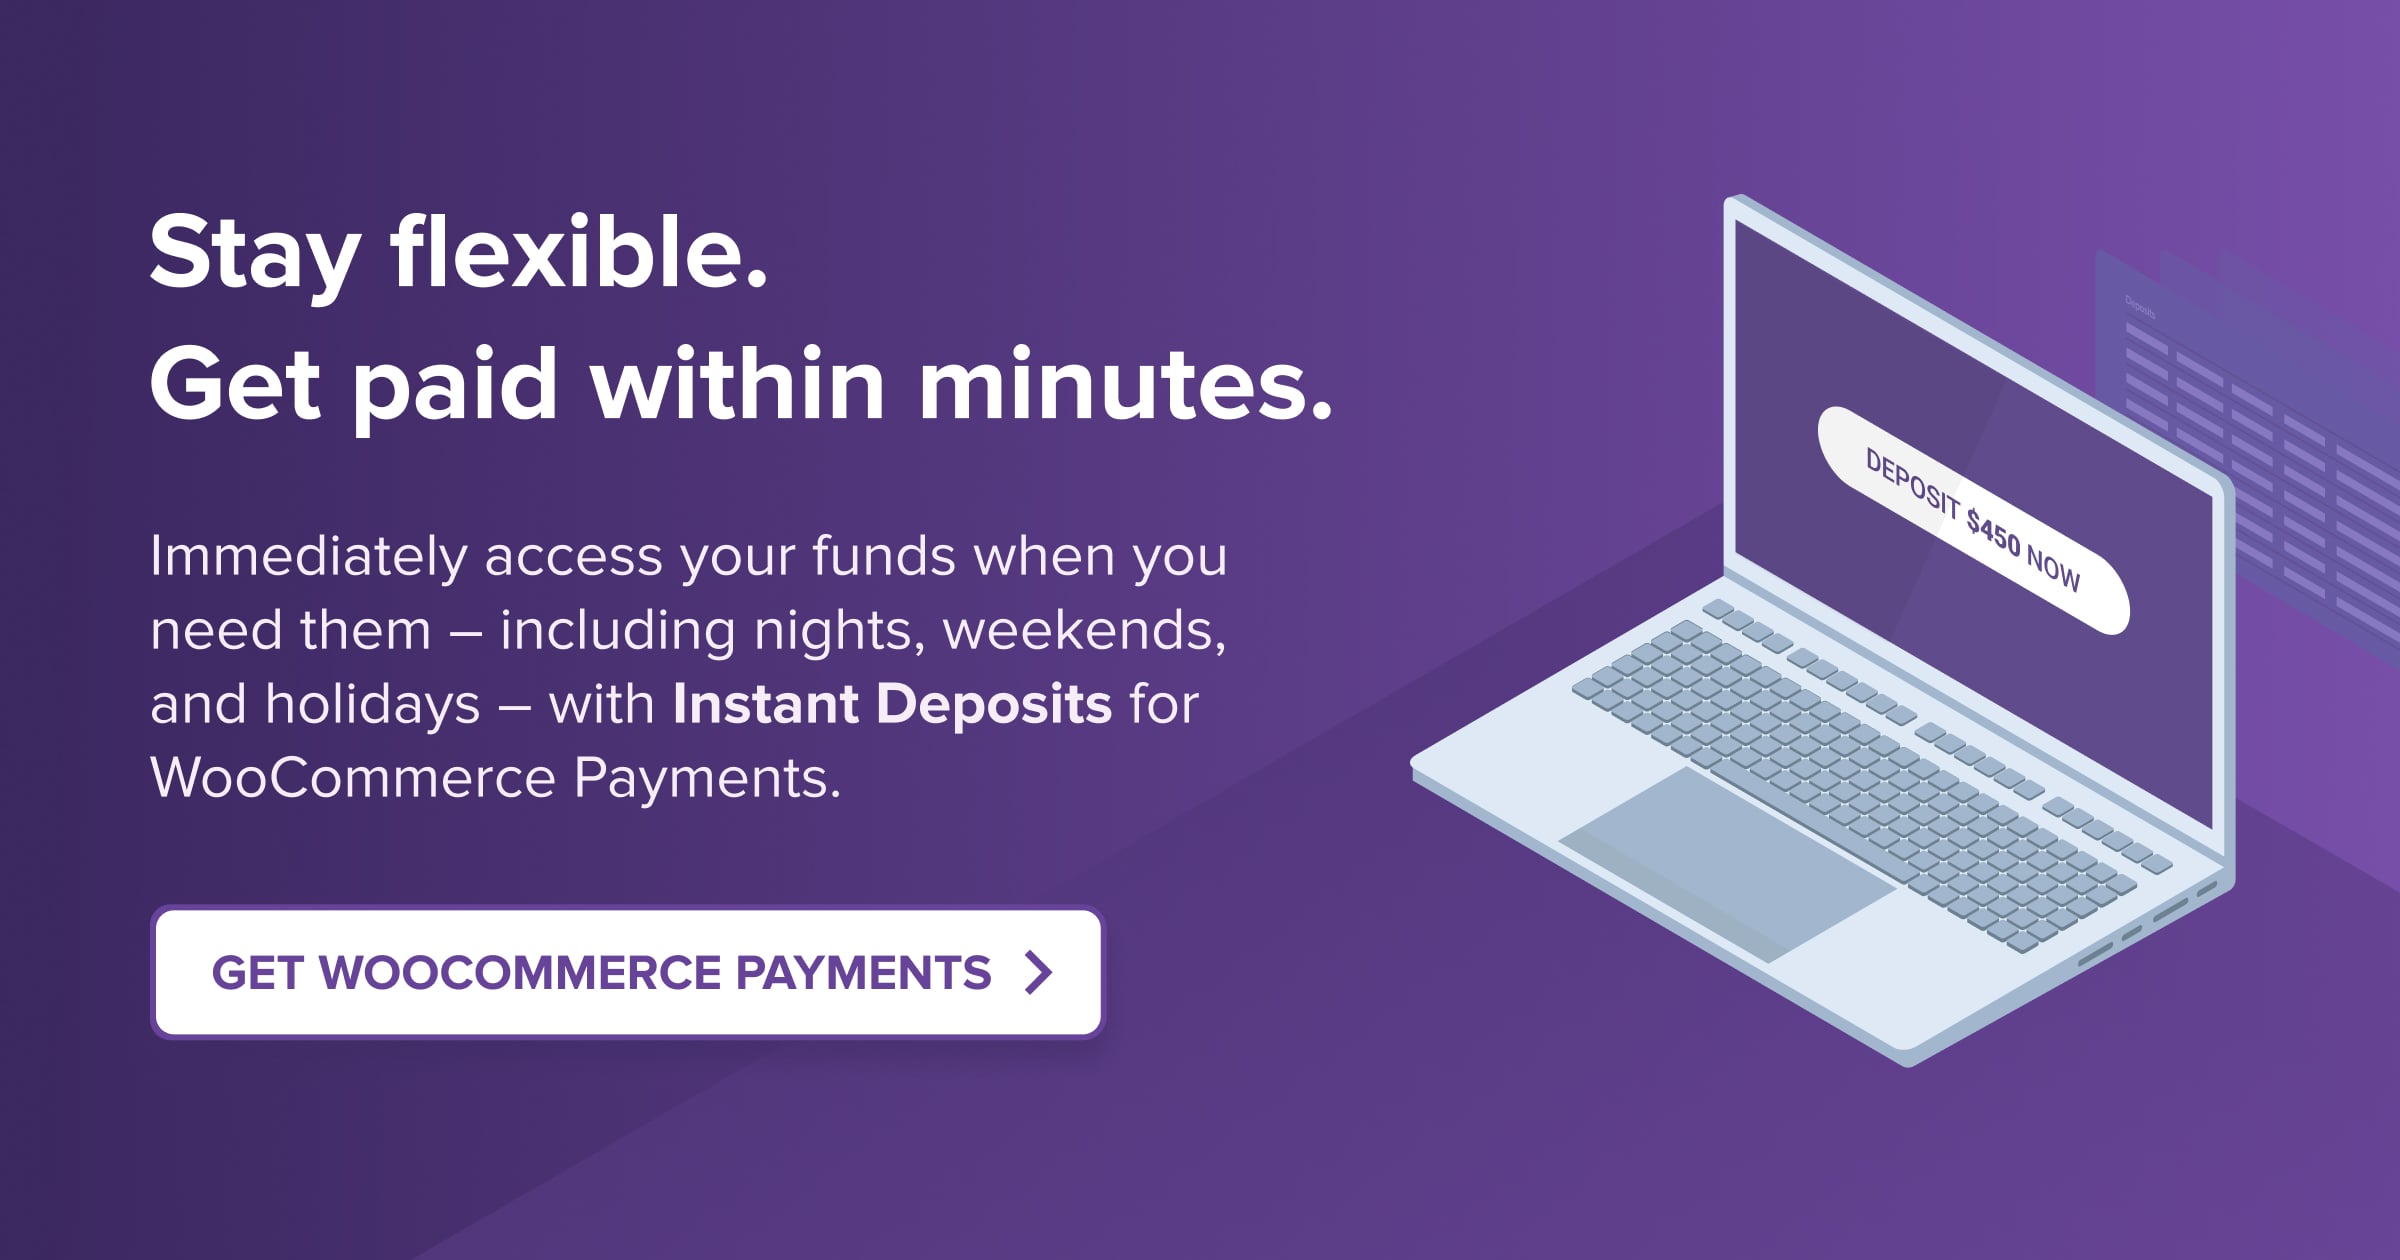 Get Instant Deposits with WooCommerce Payments